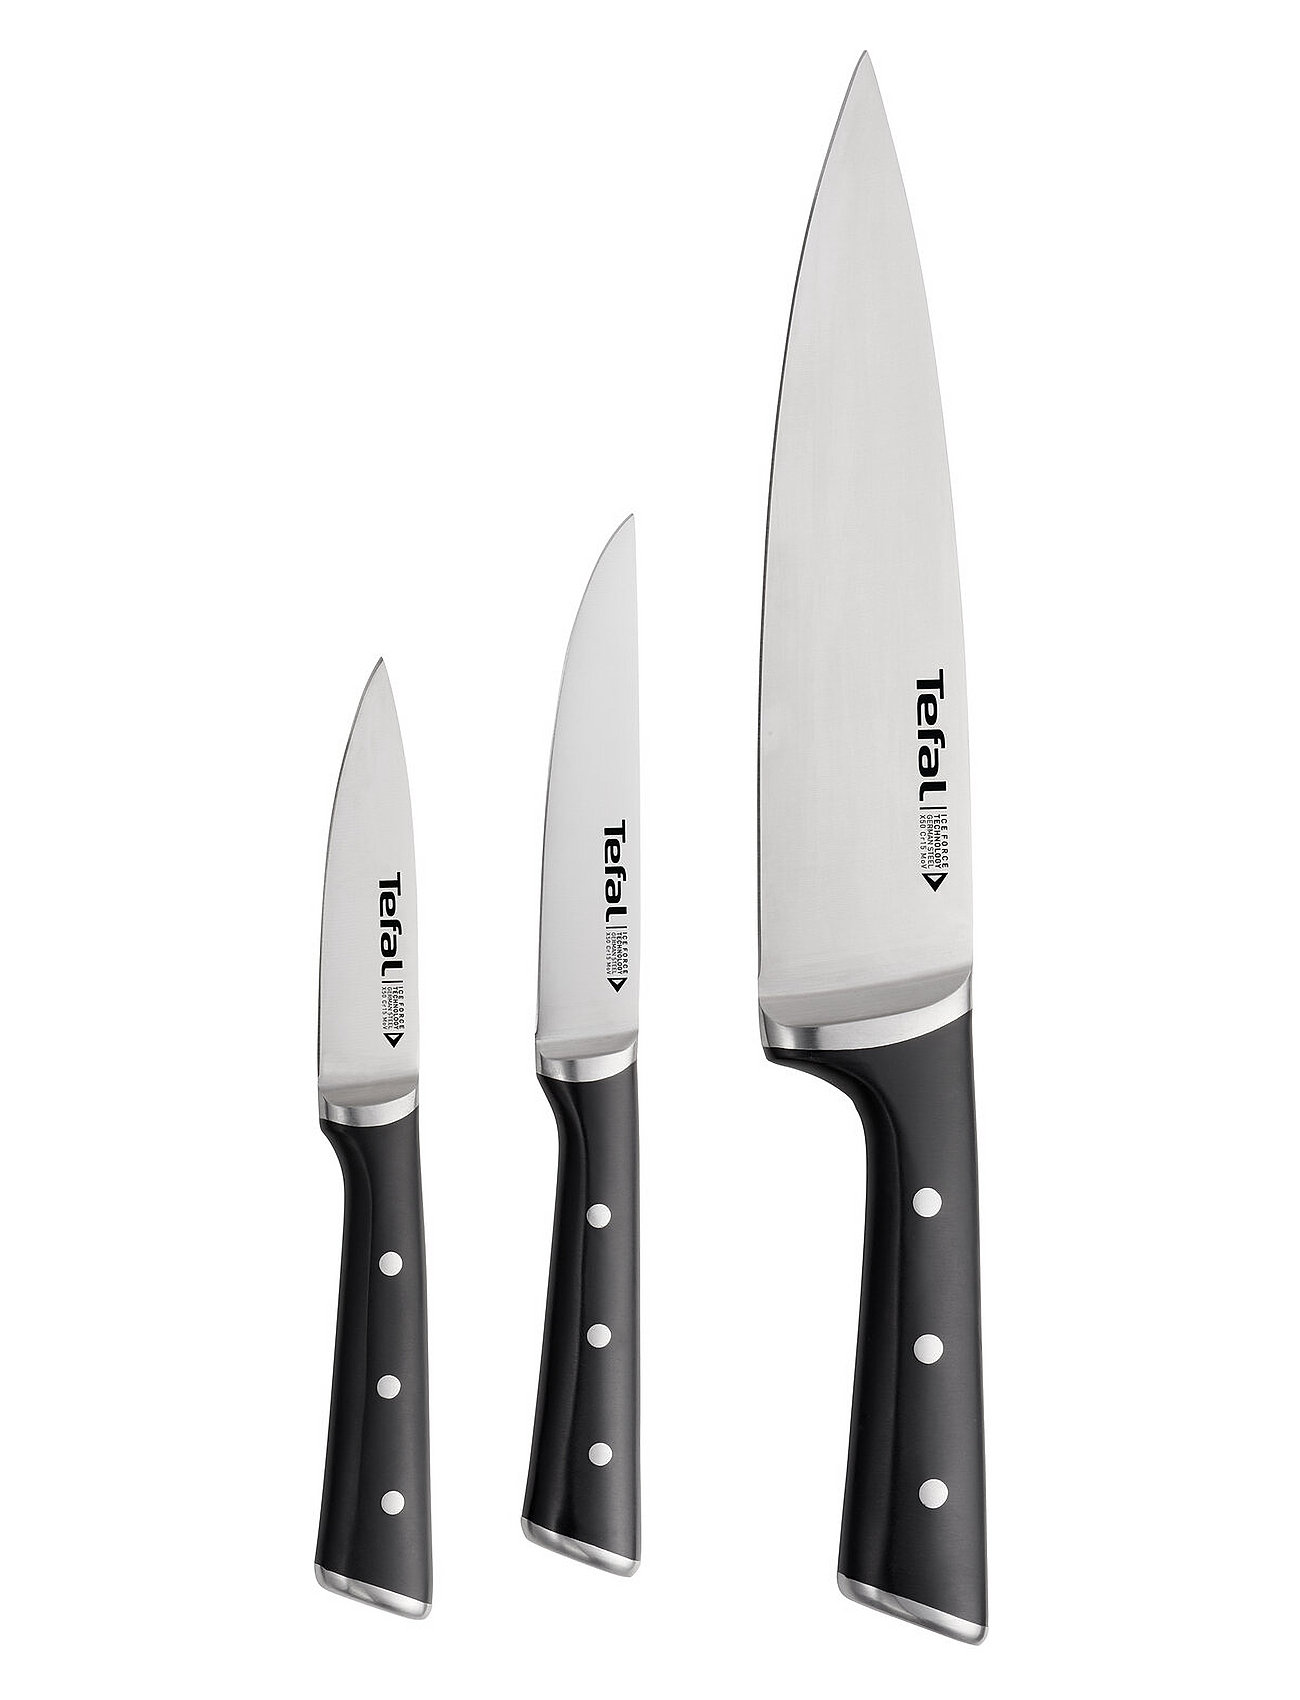 Ice knife Pairing-, knives & 3pcs accessories Set kitchen Utility-, Knife Chef Force – – Tefal